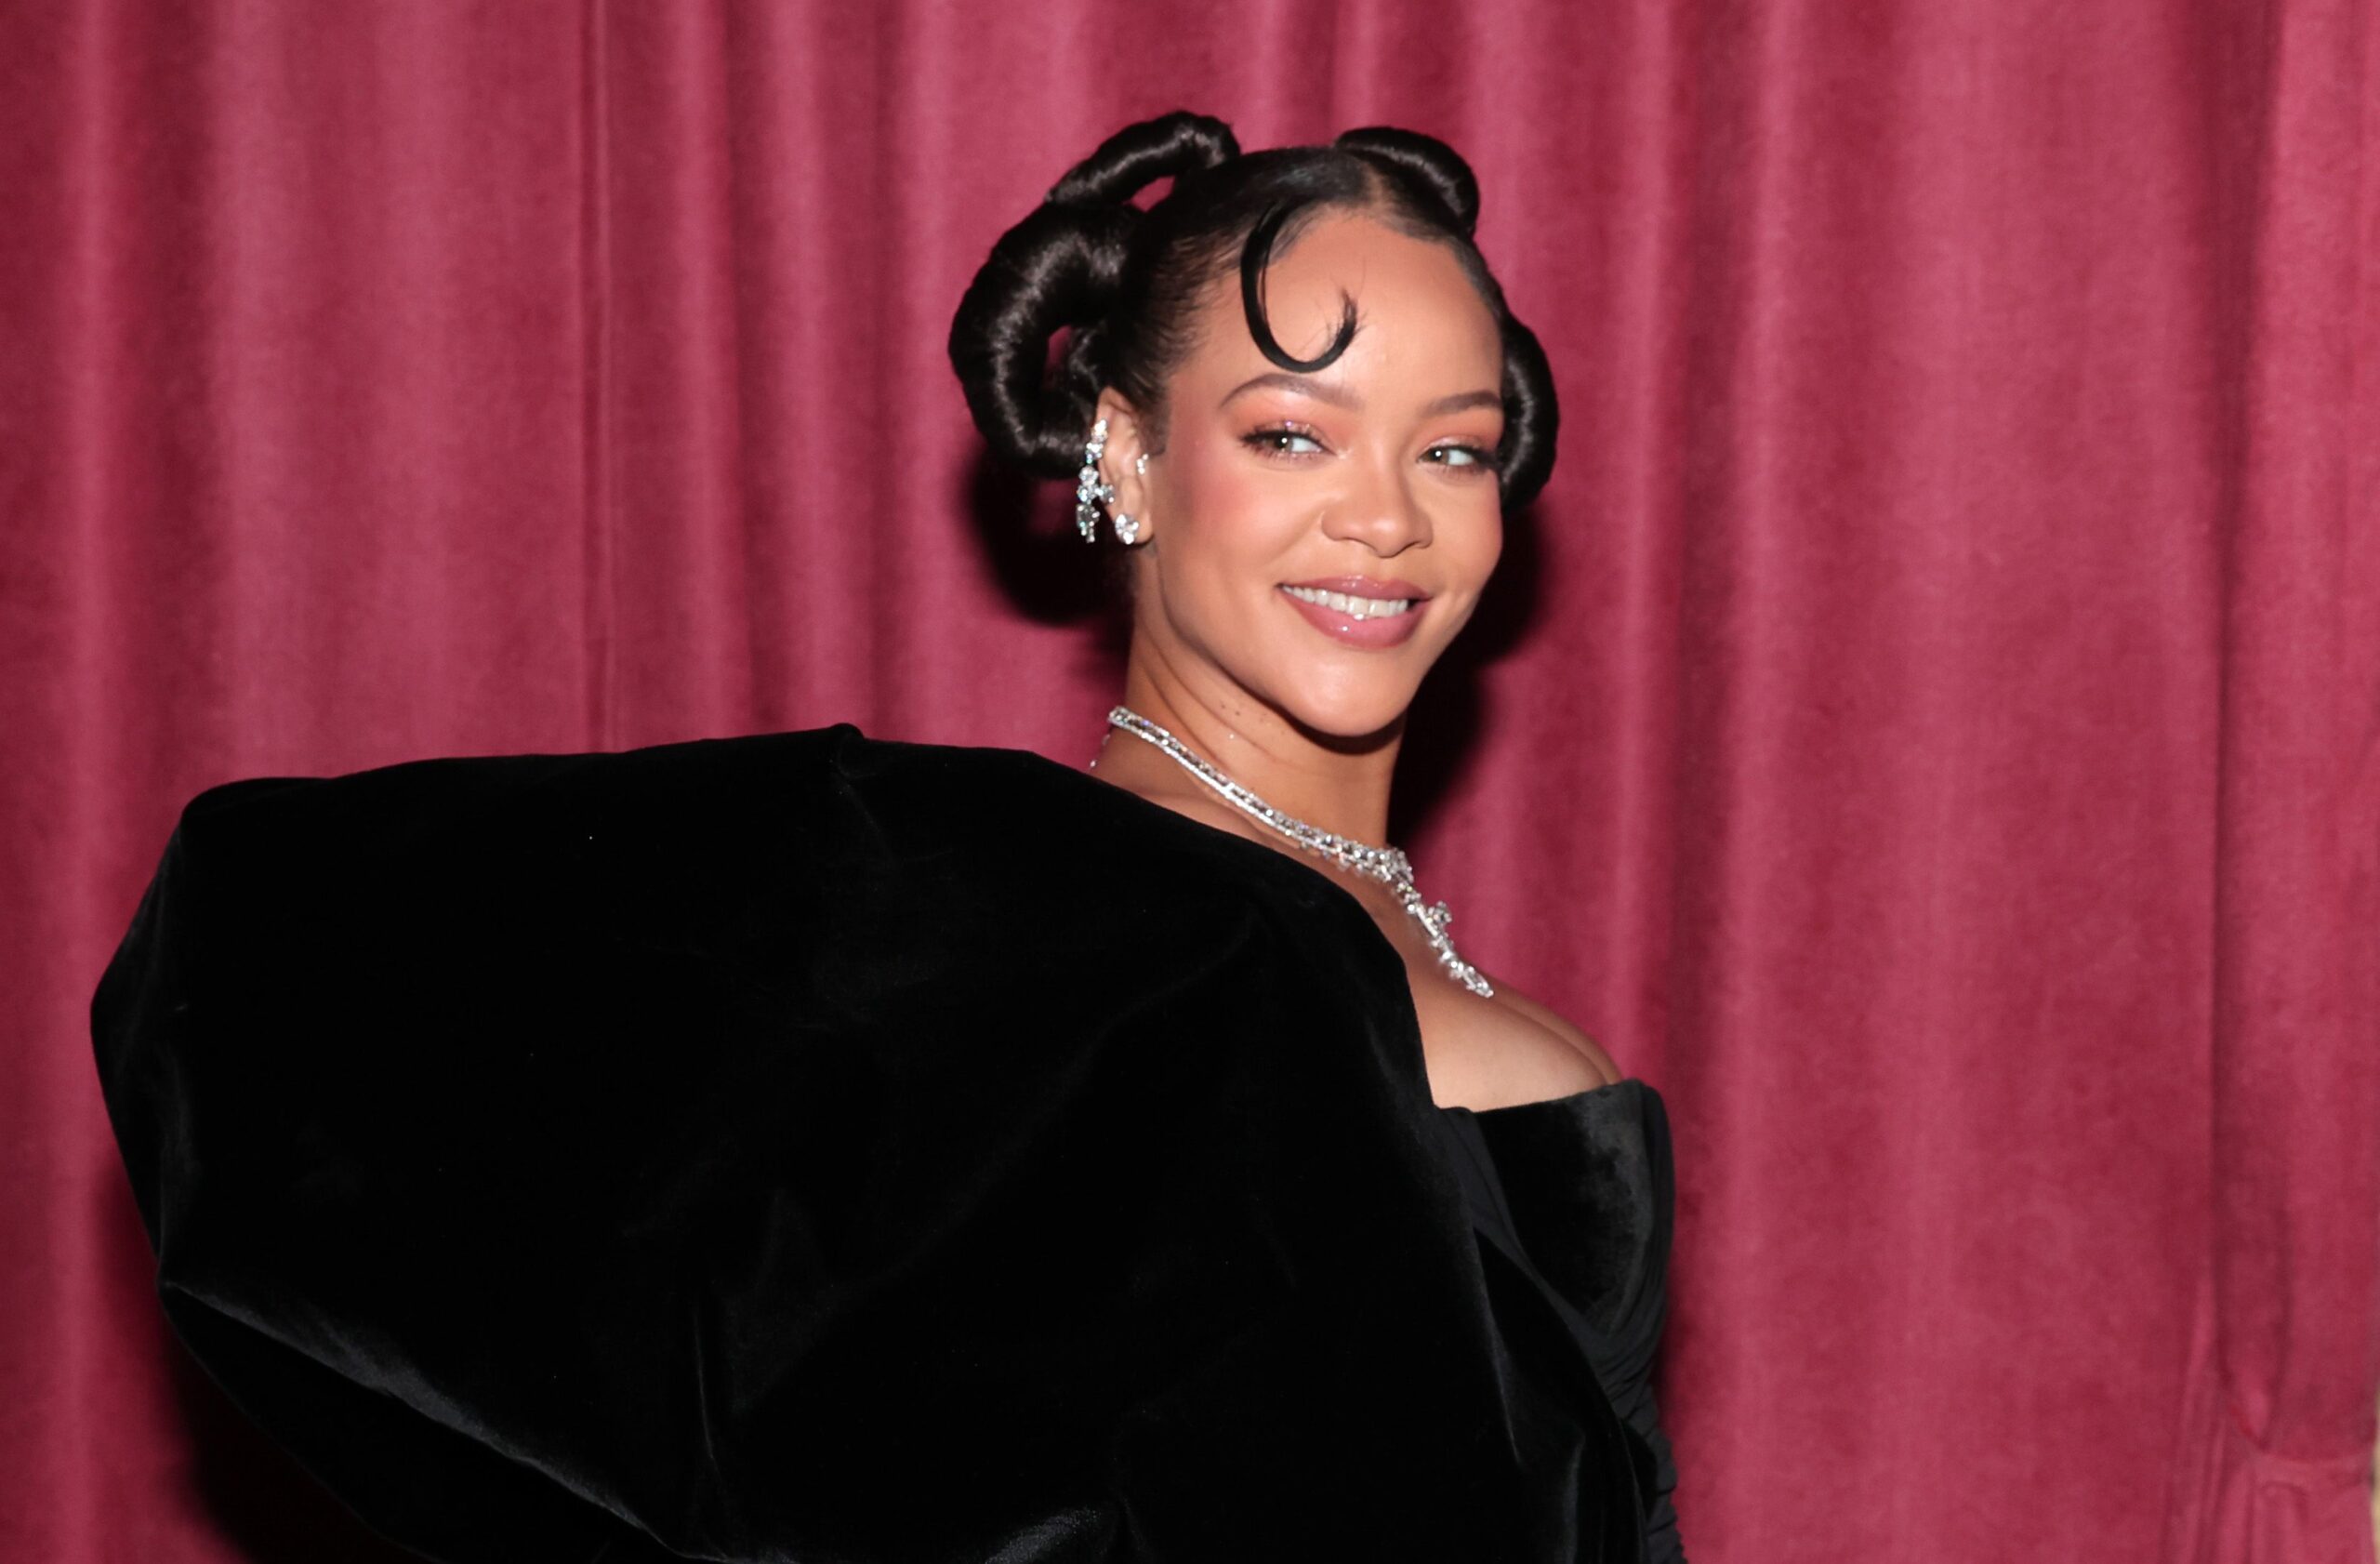 Confirmed Rihanna To Perform 'Lift Me Up' at 2023 Academy Awards